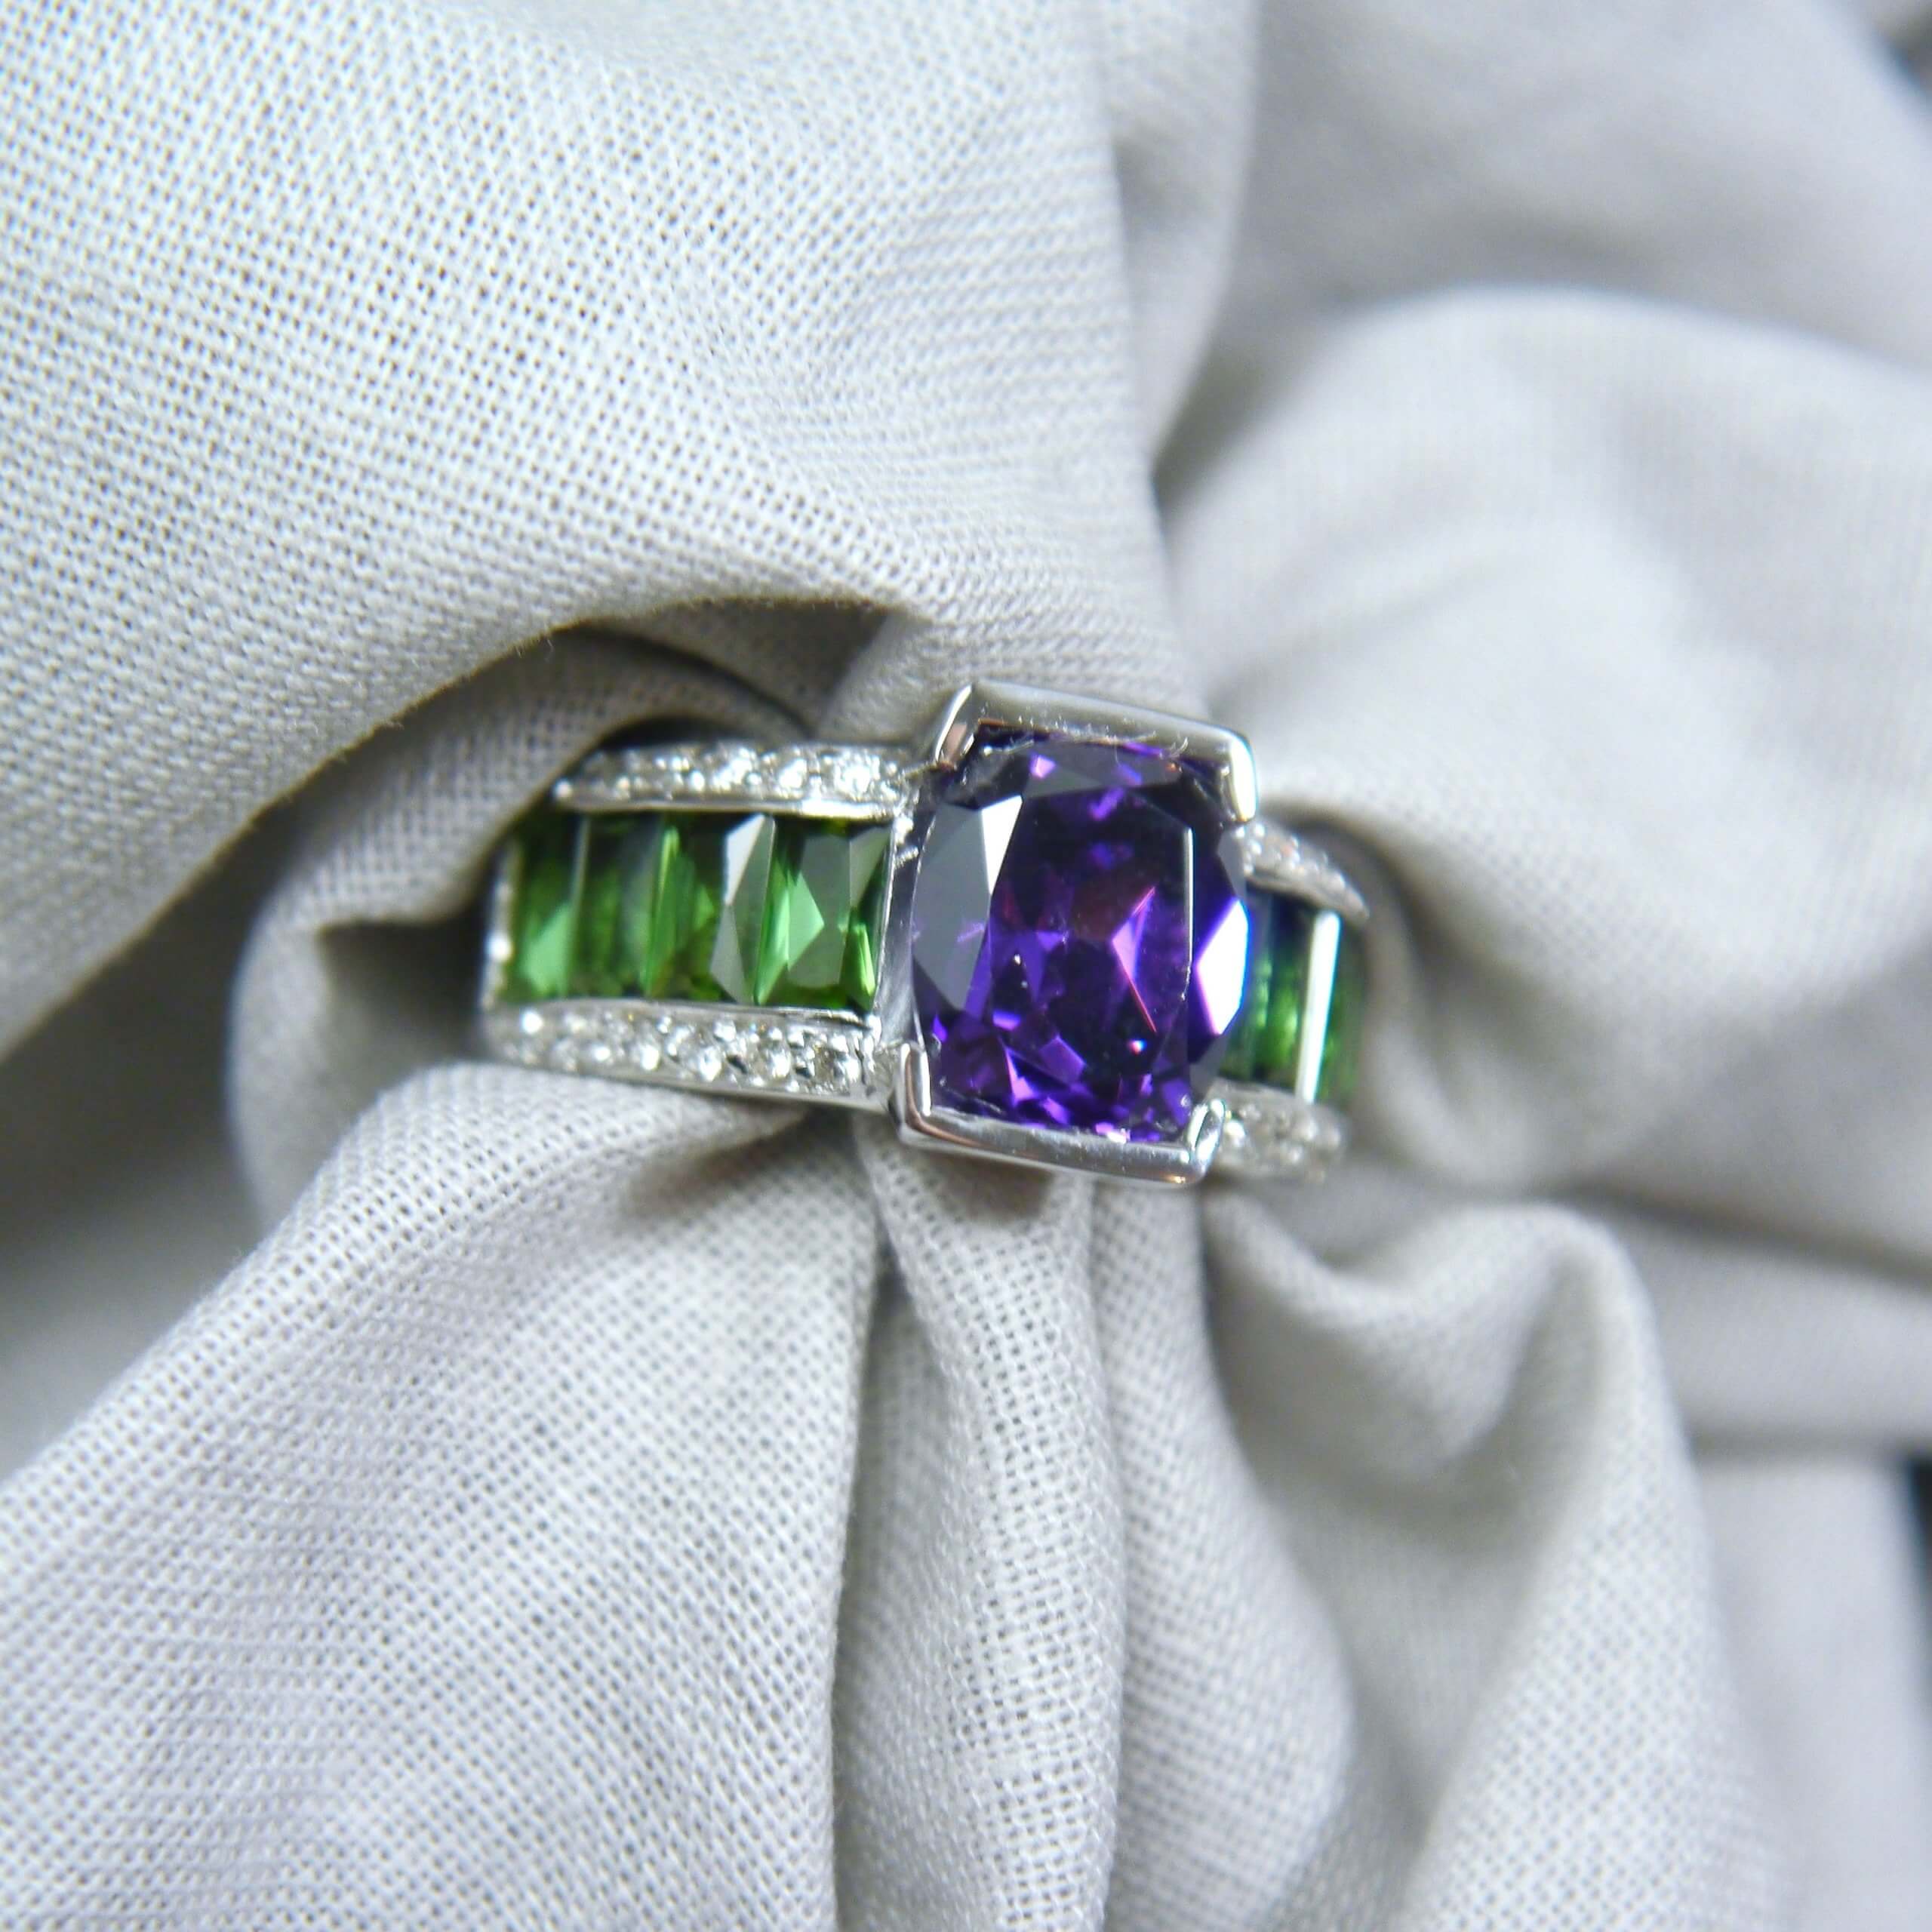 Ring - Oval Purple Upside Down Cabochon Stone